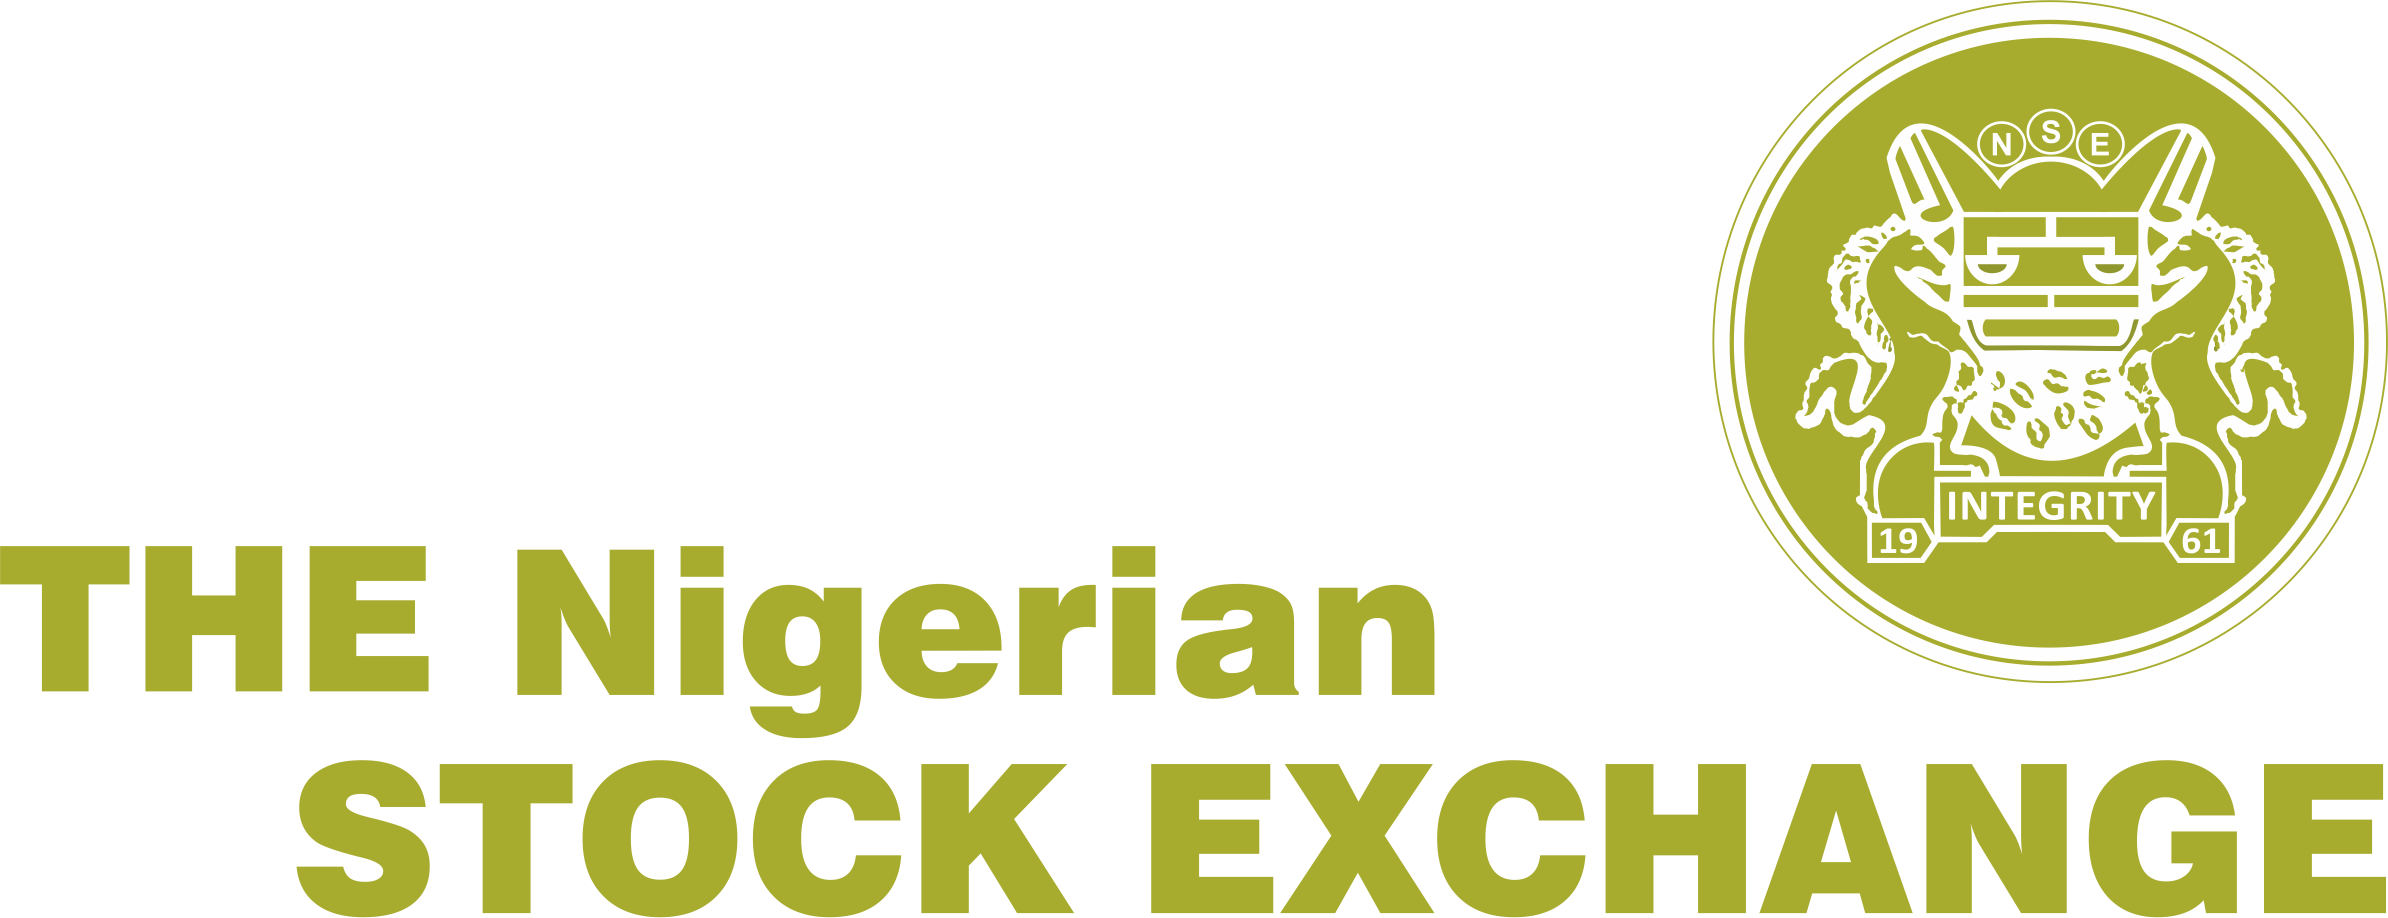 Nigerian Stock Exchange Competition